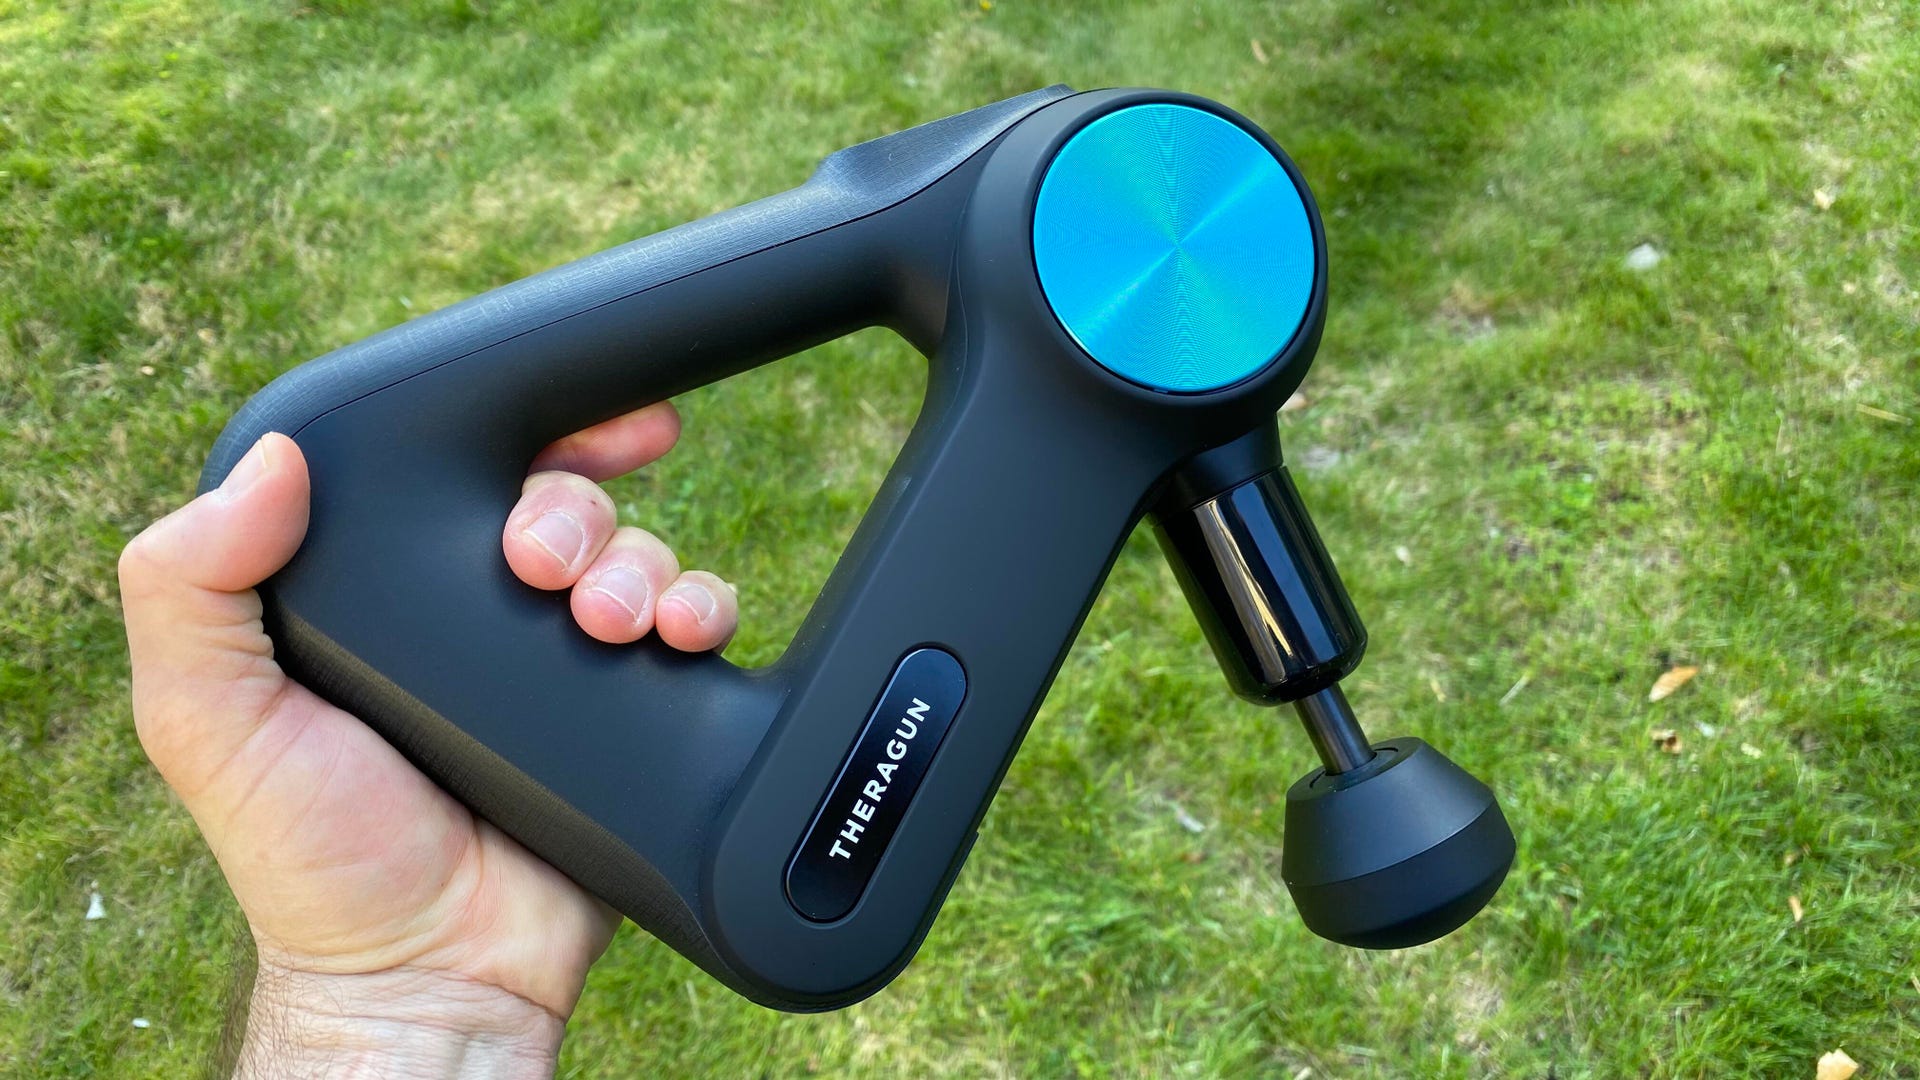 Want a massage gun but don't want to shell out the big bucks? This $20